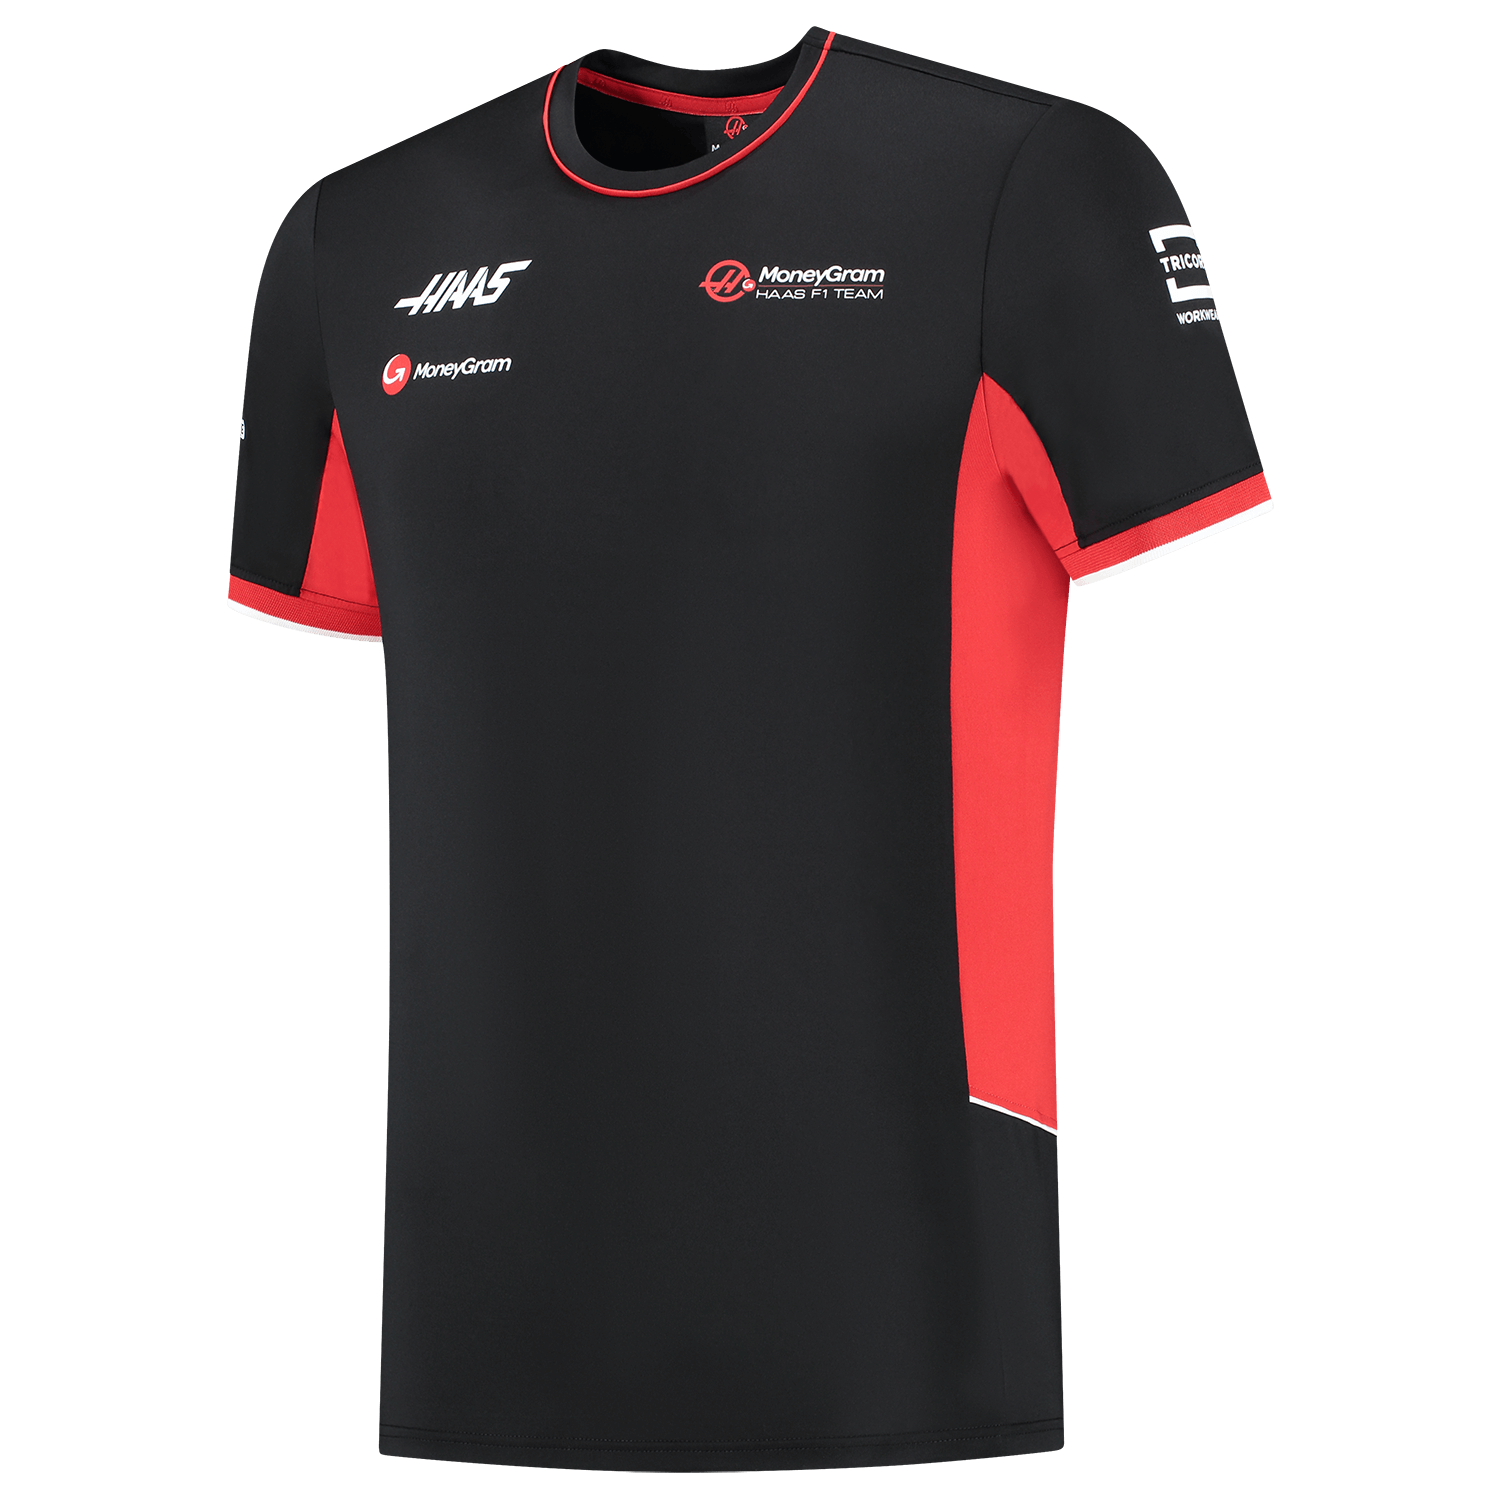 Haas F1 - T-shirt Fitted  - 901246 (05)